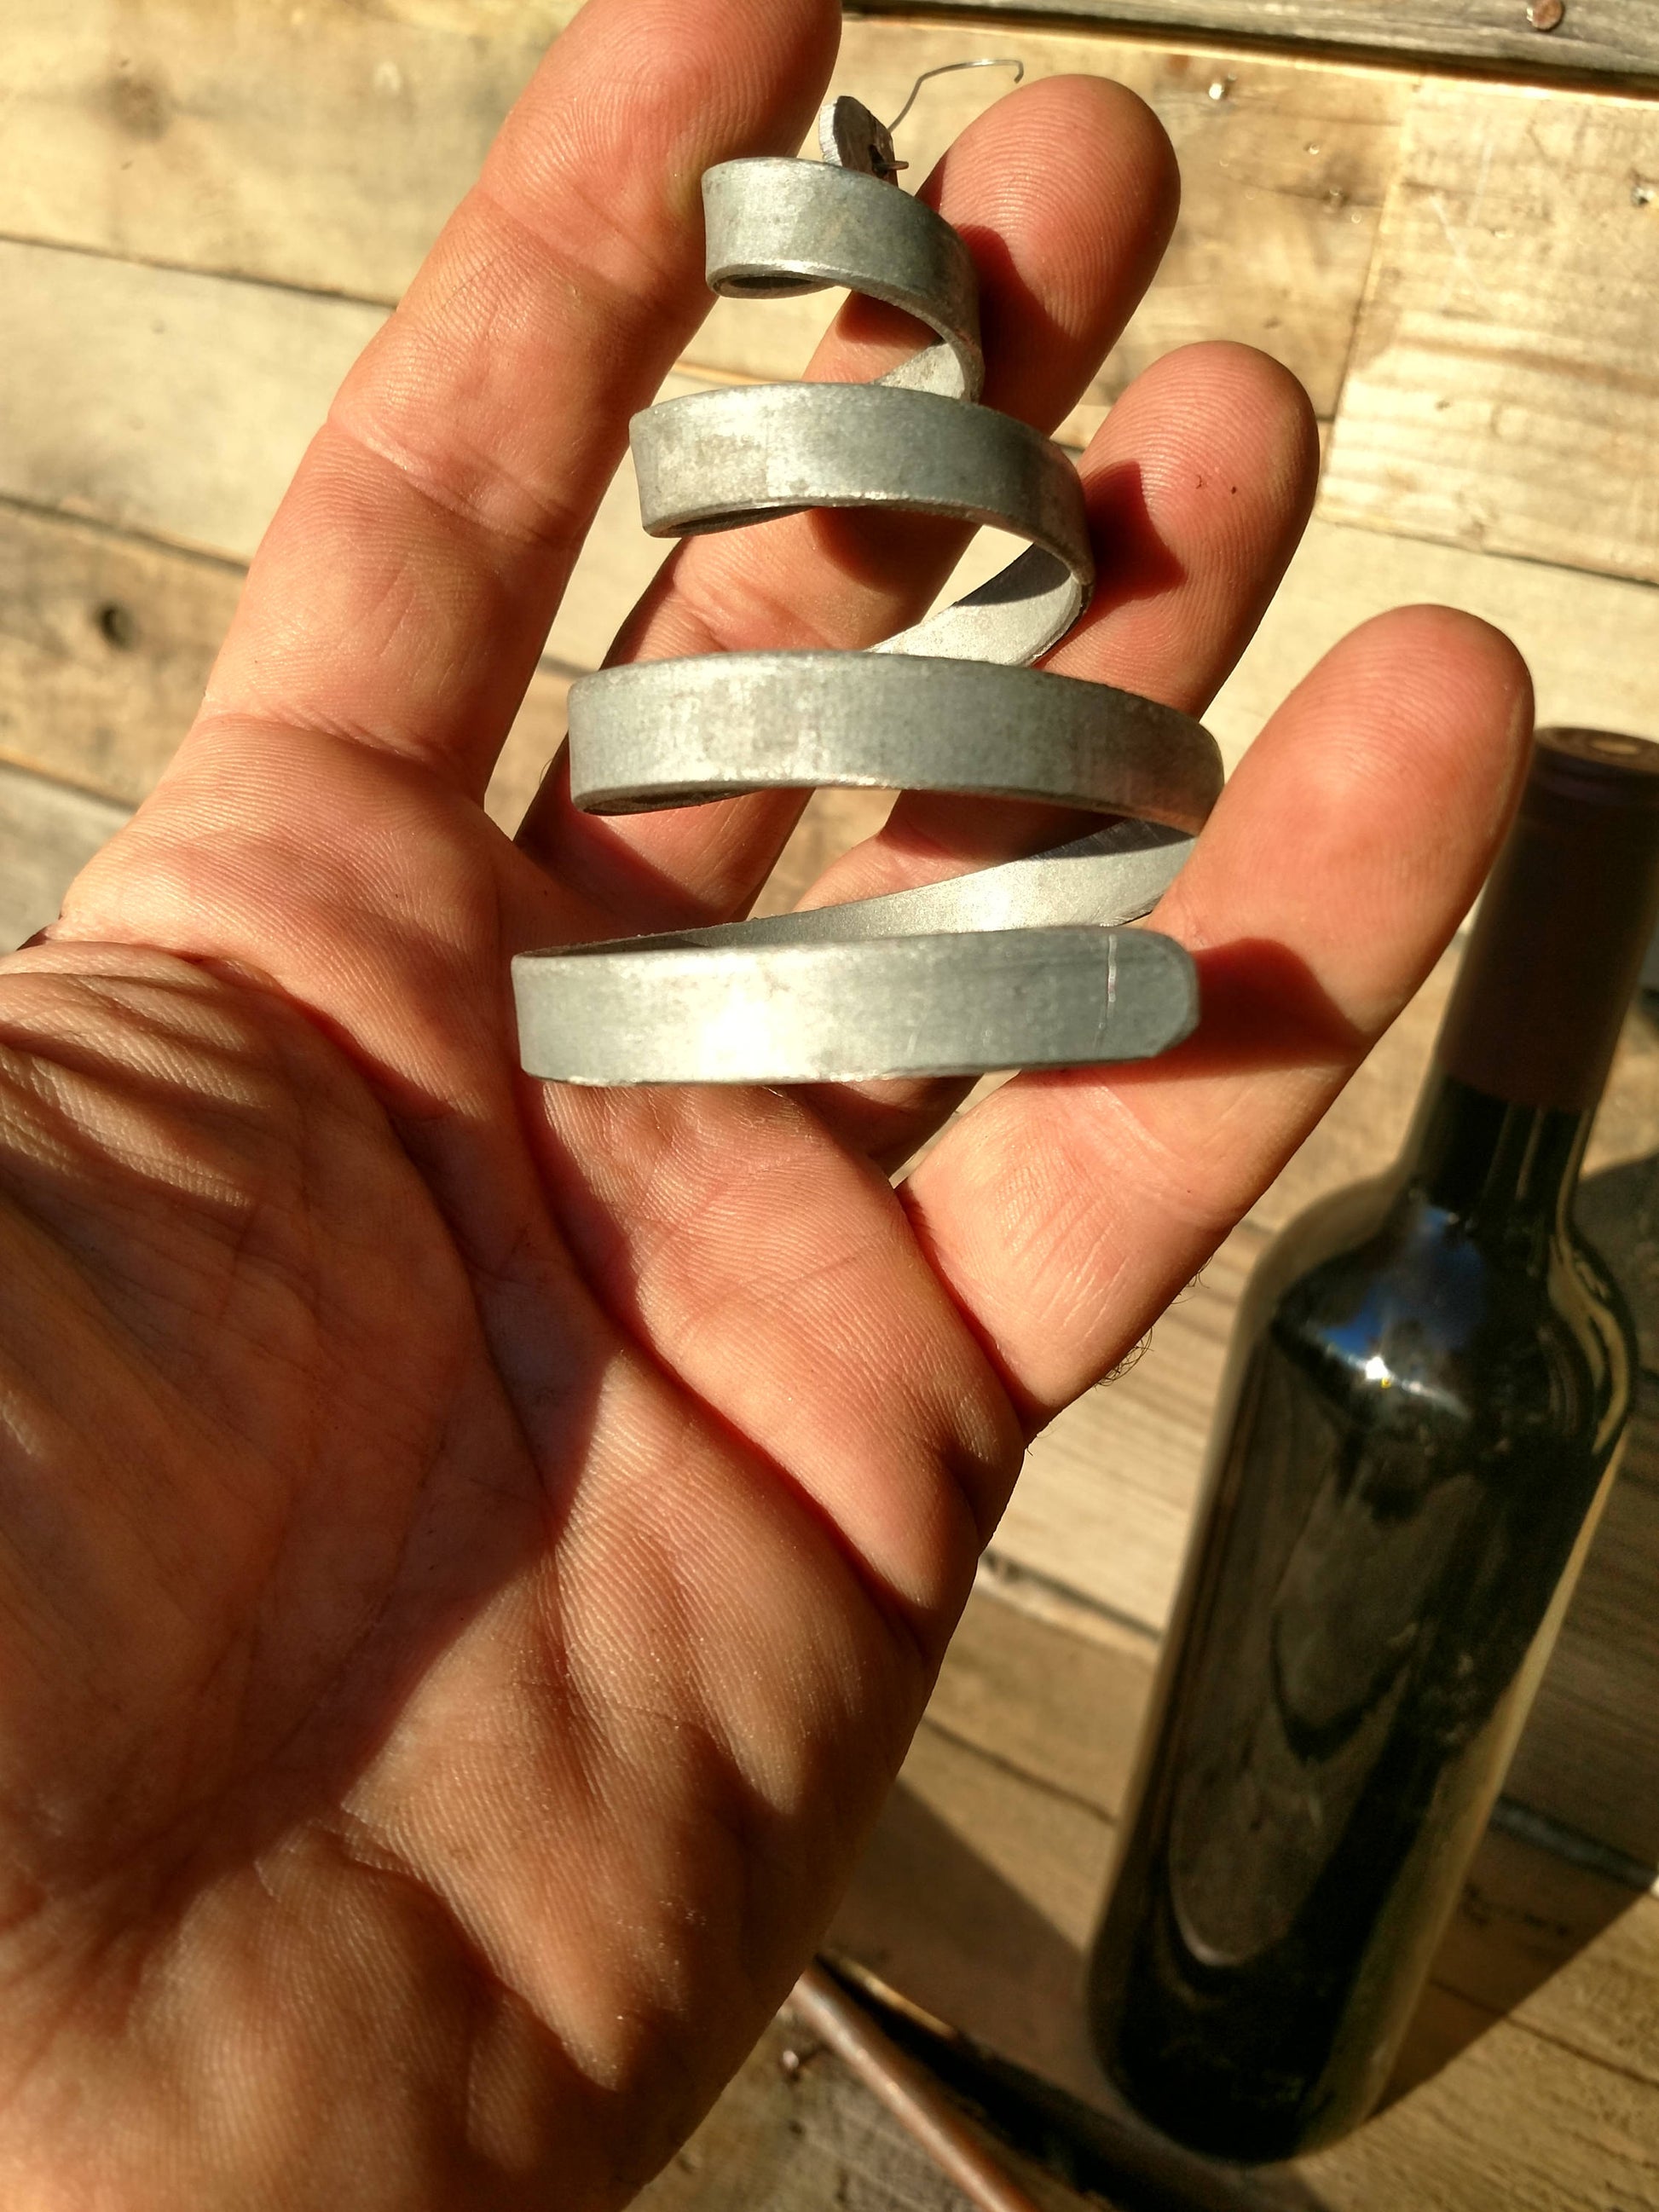 Wine Barrel Ring Ornament - Mimilo - Set of 3 made from retired Napa wine barrel rings. 100% Recycled!